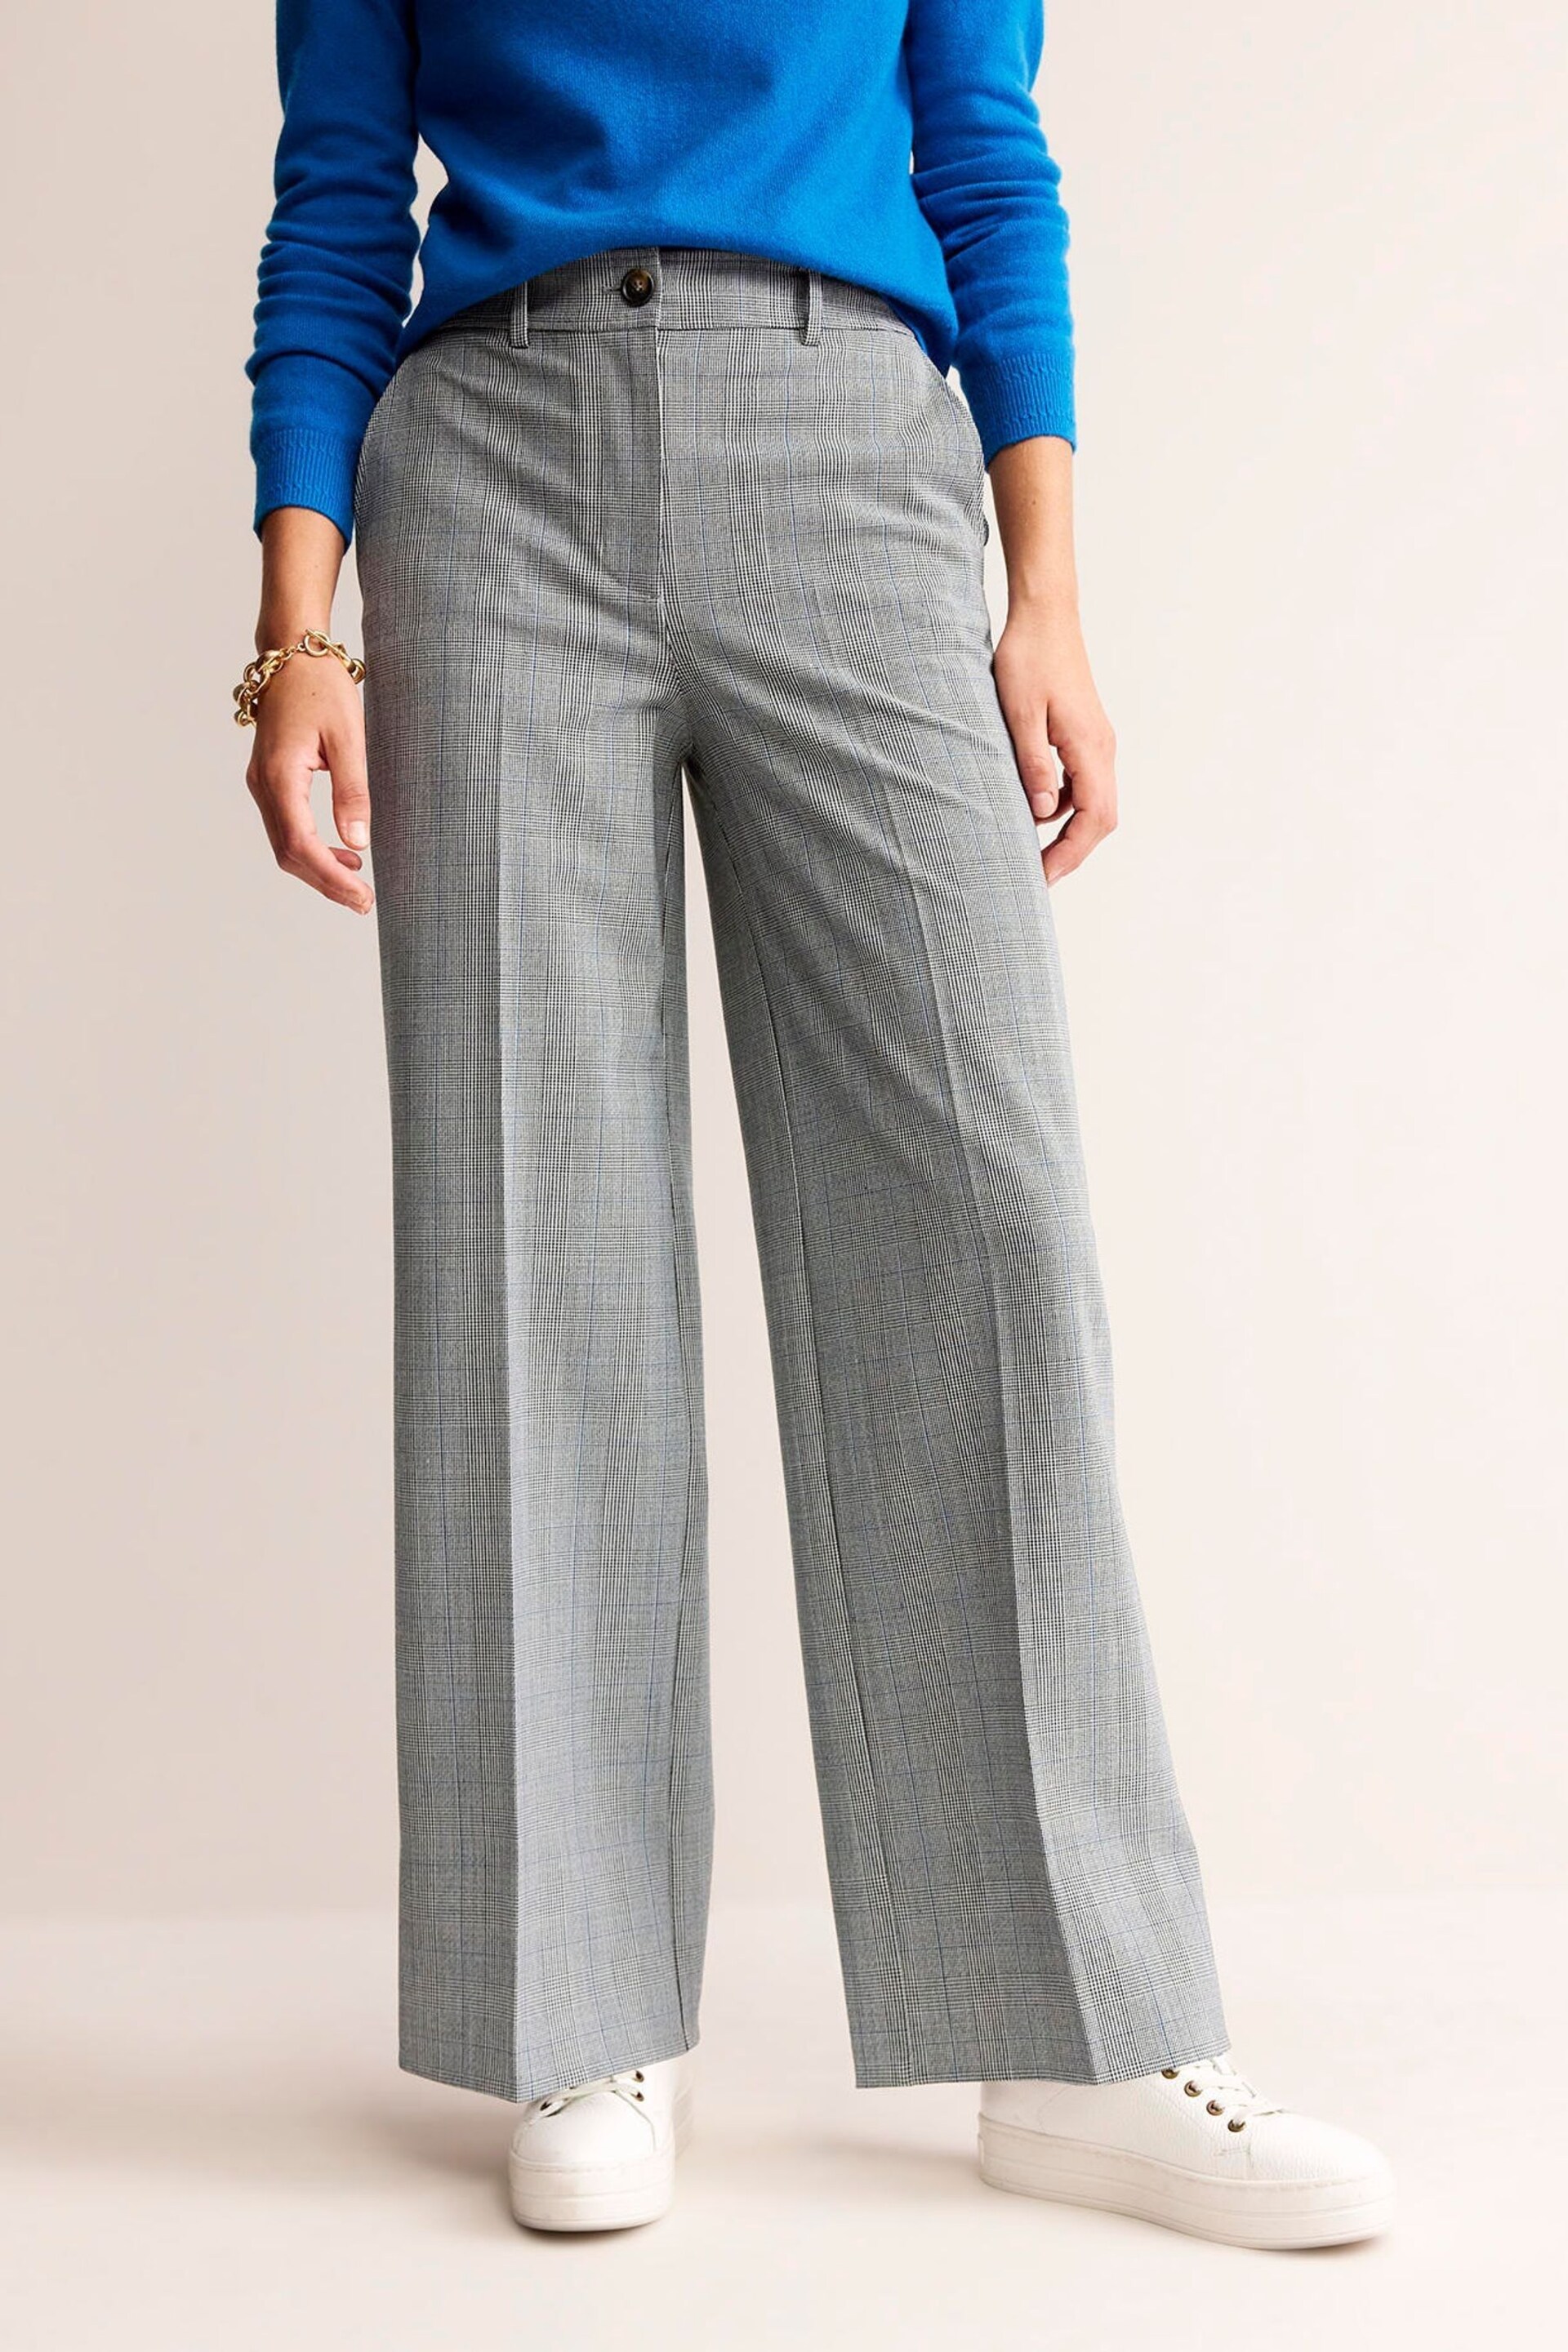 Boden Grey Westbourne Wool-Twill Trousers - Image 2 of 5